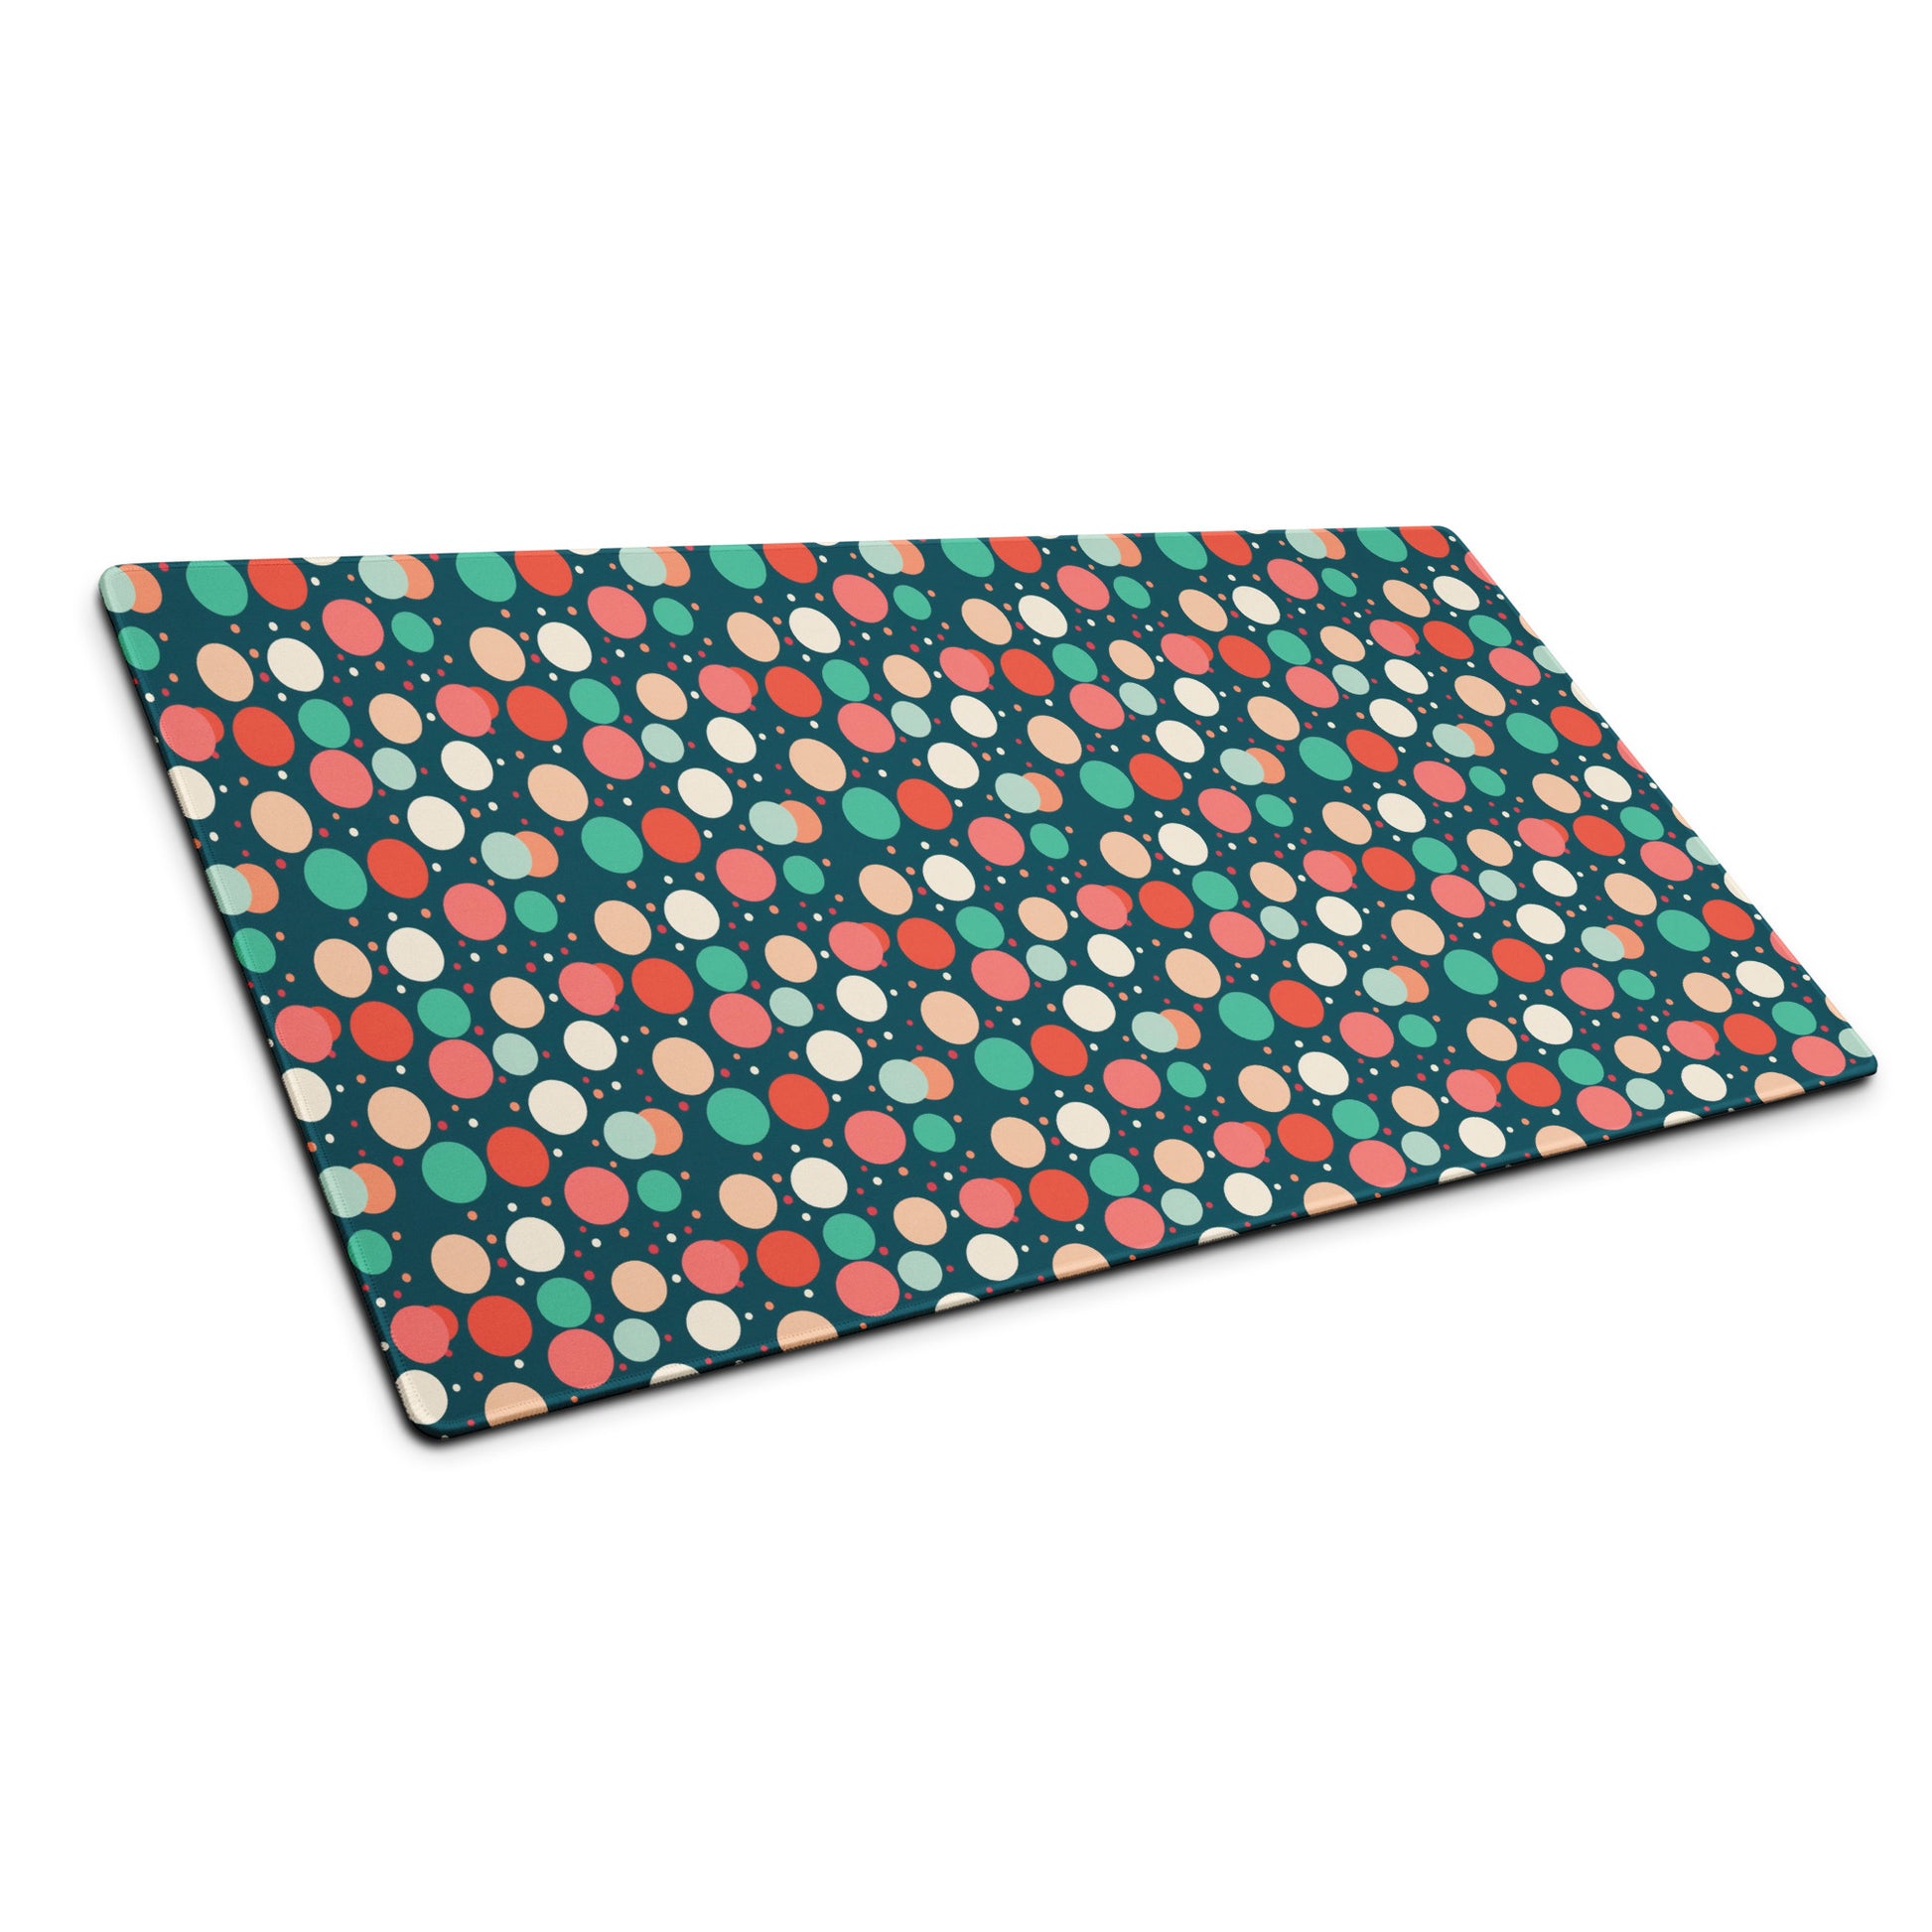  A 36" x 18" desk pad with red teal and yellow polka dot pattern sitting at an angle.